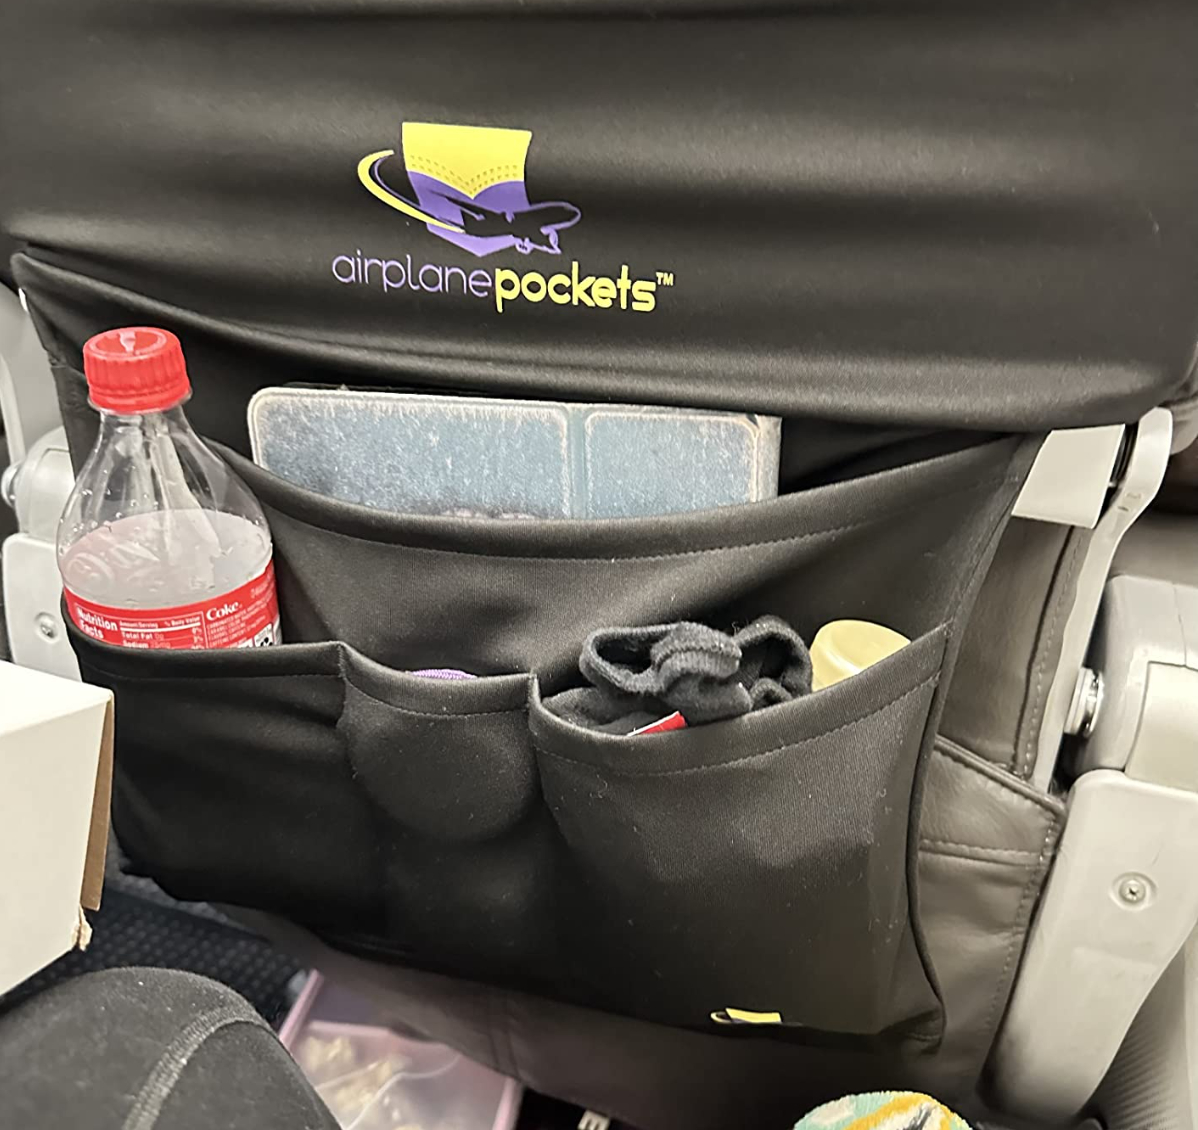 airplane pockets over an airline tray table